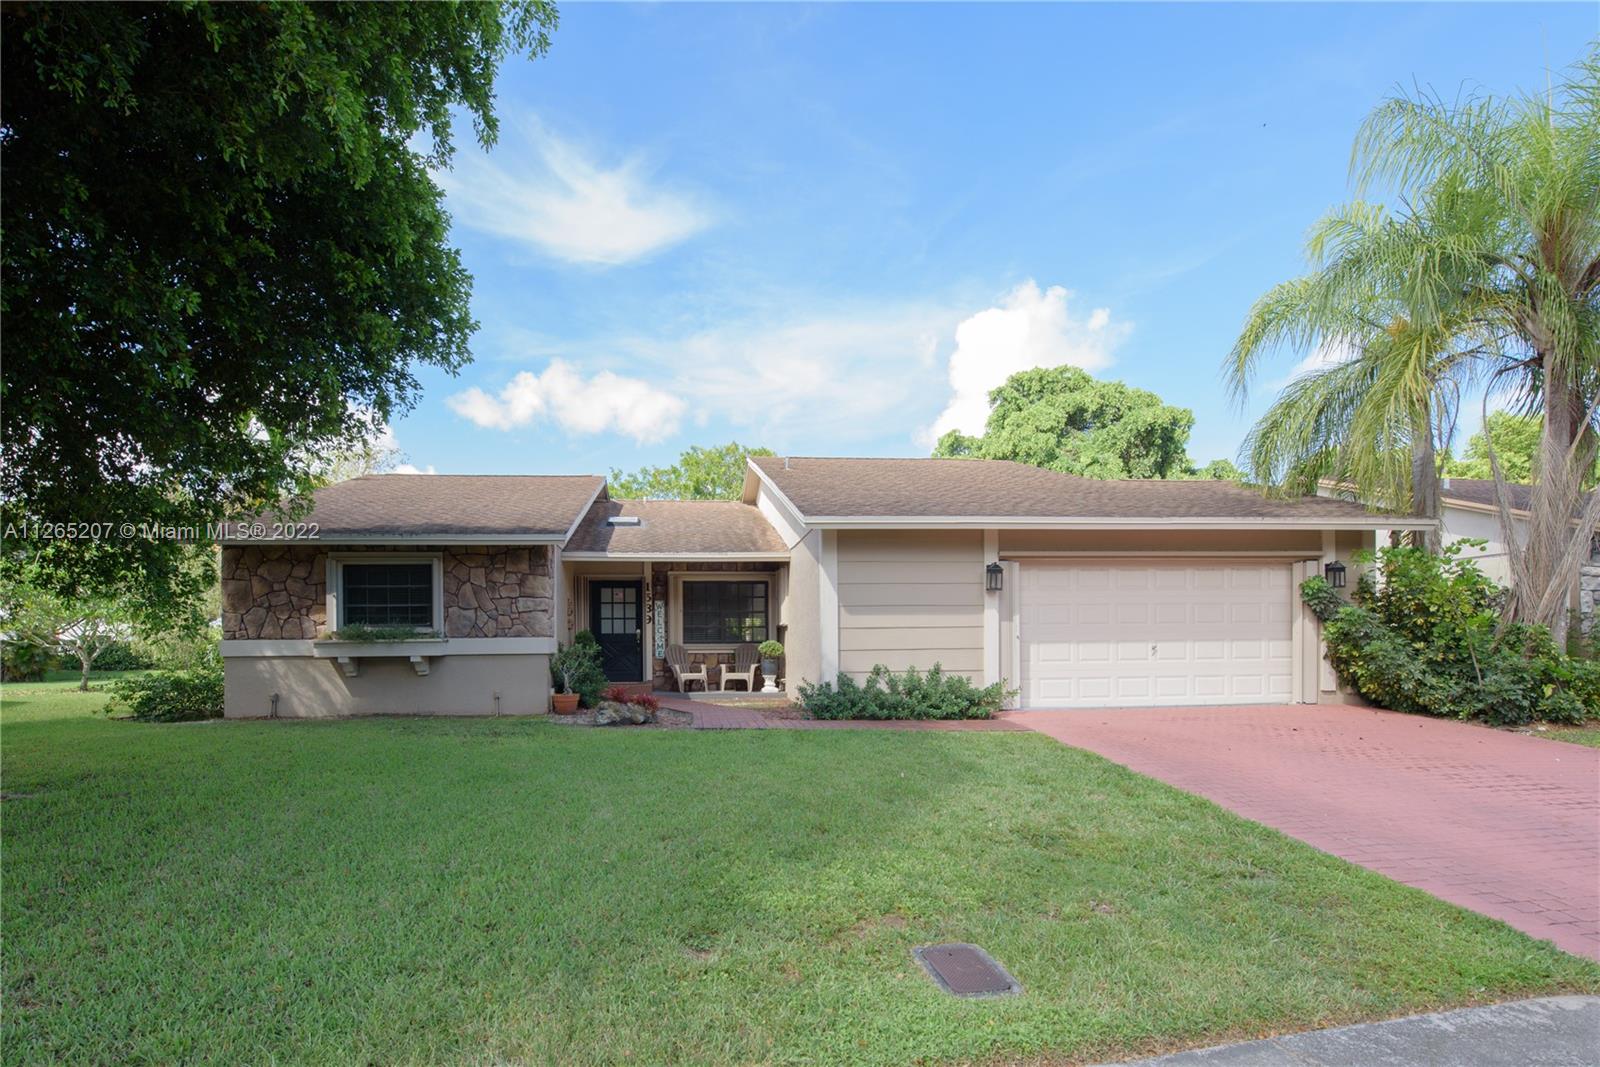 LOVELY 3BR/ 2 BA SINGLE STORY HOME W/ 2 CAR GARAGE IN DESIRABLE COMMUNITY OF THE VILLAGES OF HOMESTEAD. SITUATED ON A LARGE OVERSIZED LOT THIS HOME OFFERS SPACIOUS LIVING AREA W/ BEAUTIFUL WOOD FLOORS, OPEN KITCHEN, CROWN MOLDING, OPEN KITCHEN, LARGE COVERED PATIO & ACCORDIAN SHUTTERS. COMMUNITY OFFERS CLUBHOUSE W/ POOL & GYM.